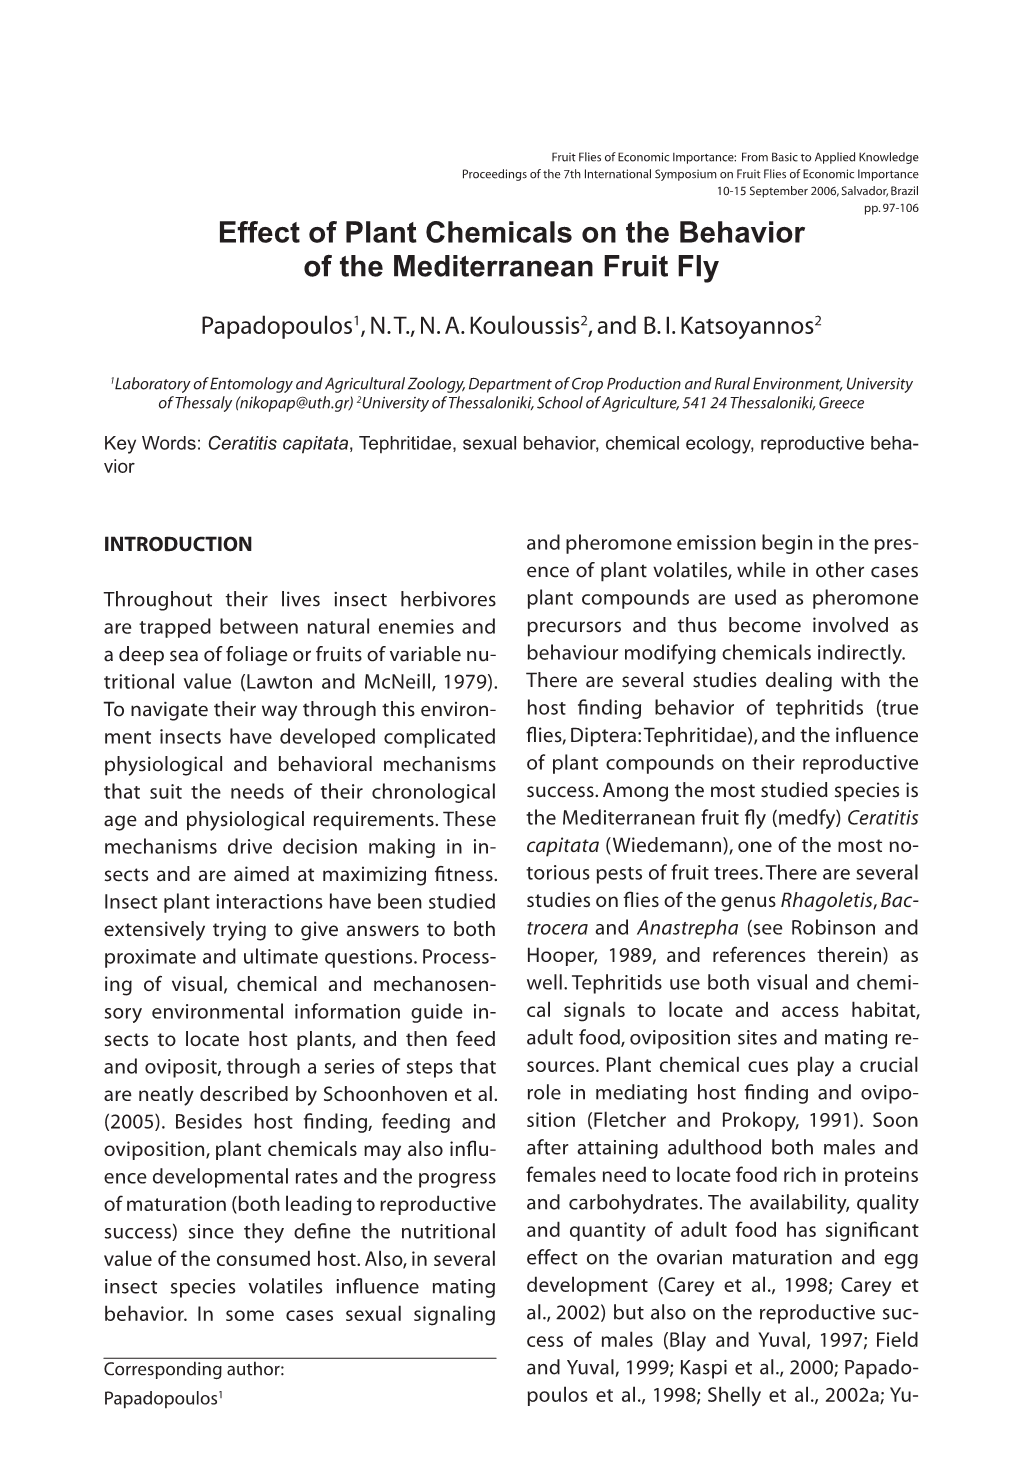 Effect of Plant Chemicals on the Behavior of the Mediterranean Fruit Fly